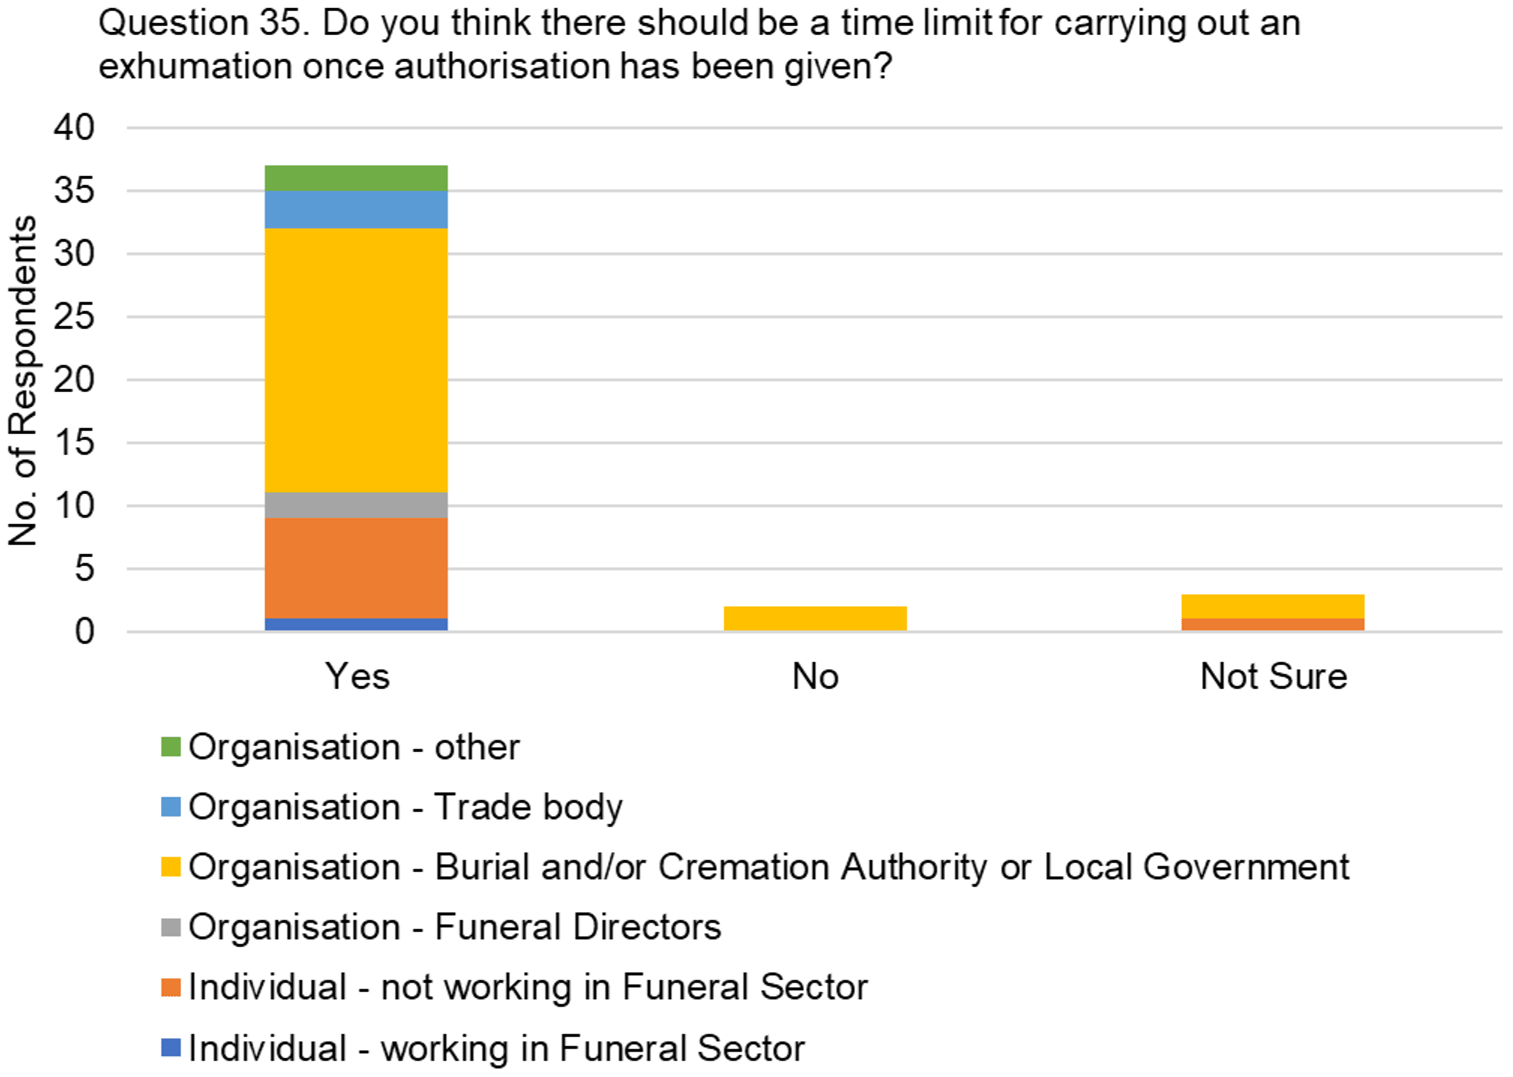 The graph visually presents the data from table 24, focussing on the responses to the question, "Do you think there should be a time limit for carrying out an exhumation once authorisation has been given?"